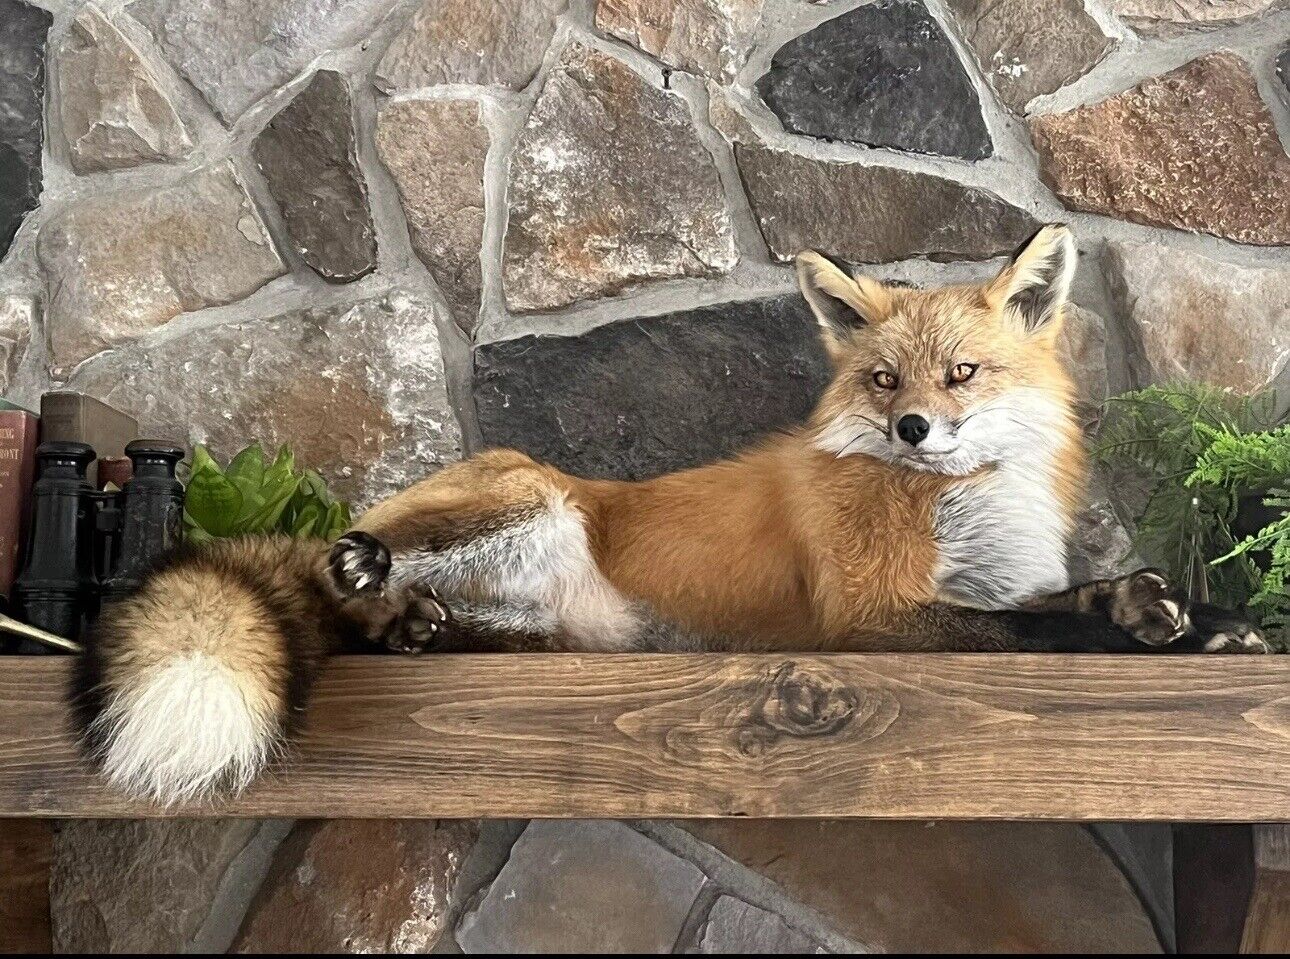 Red Fox Taxidermy Full Body Mount Cabin Camp Man Cave Home Office Den Decor NEW!